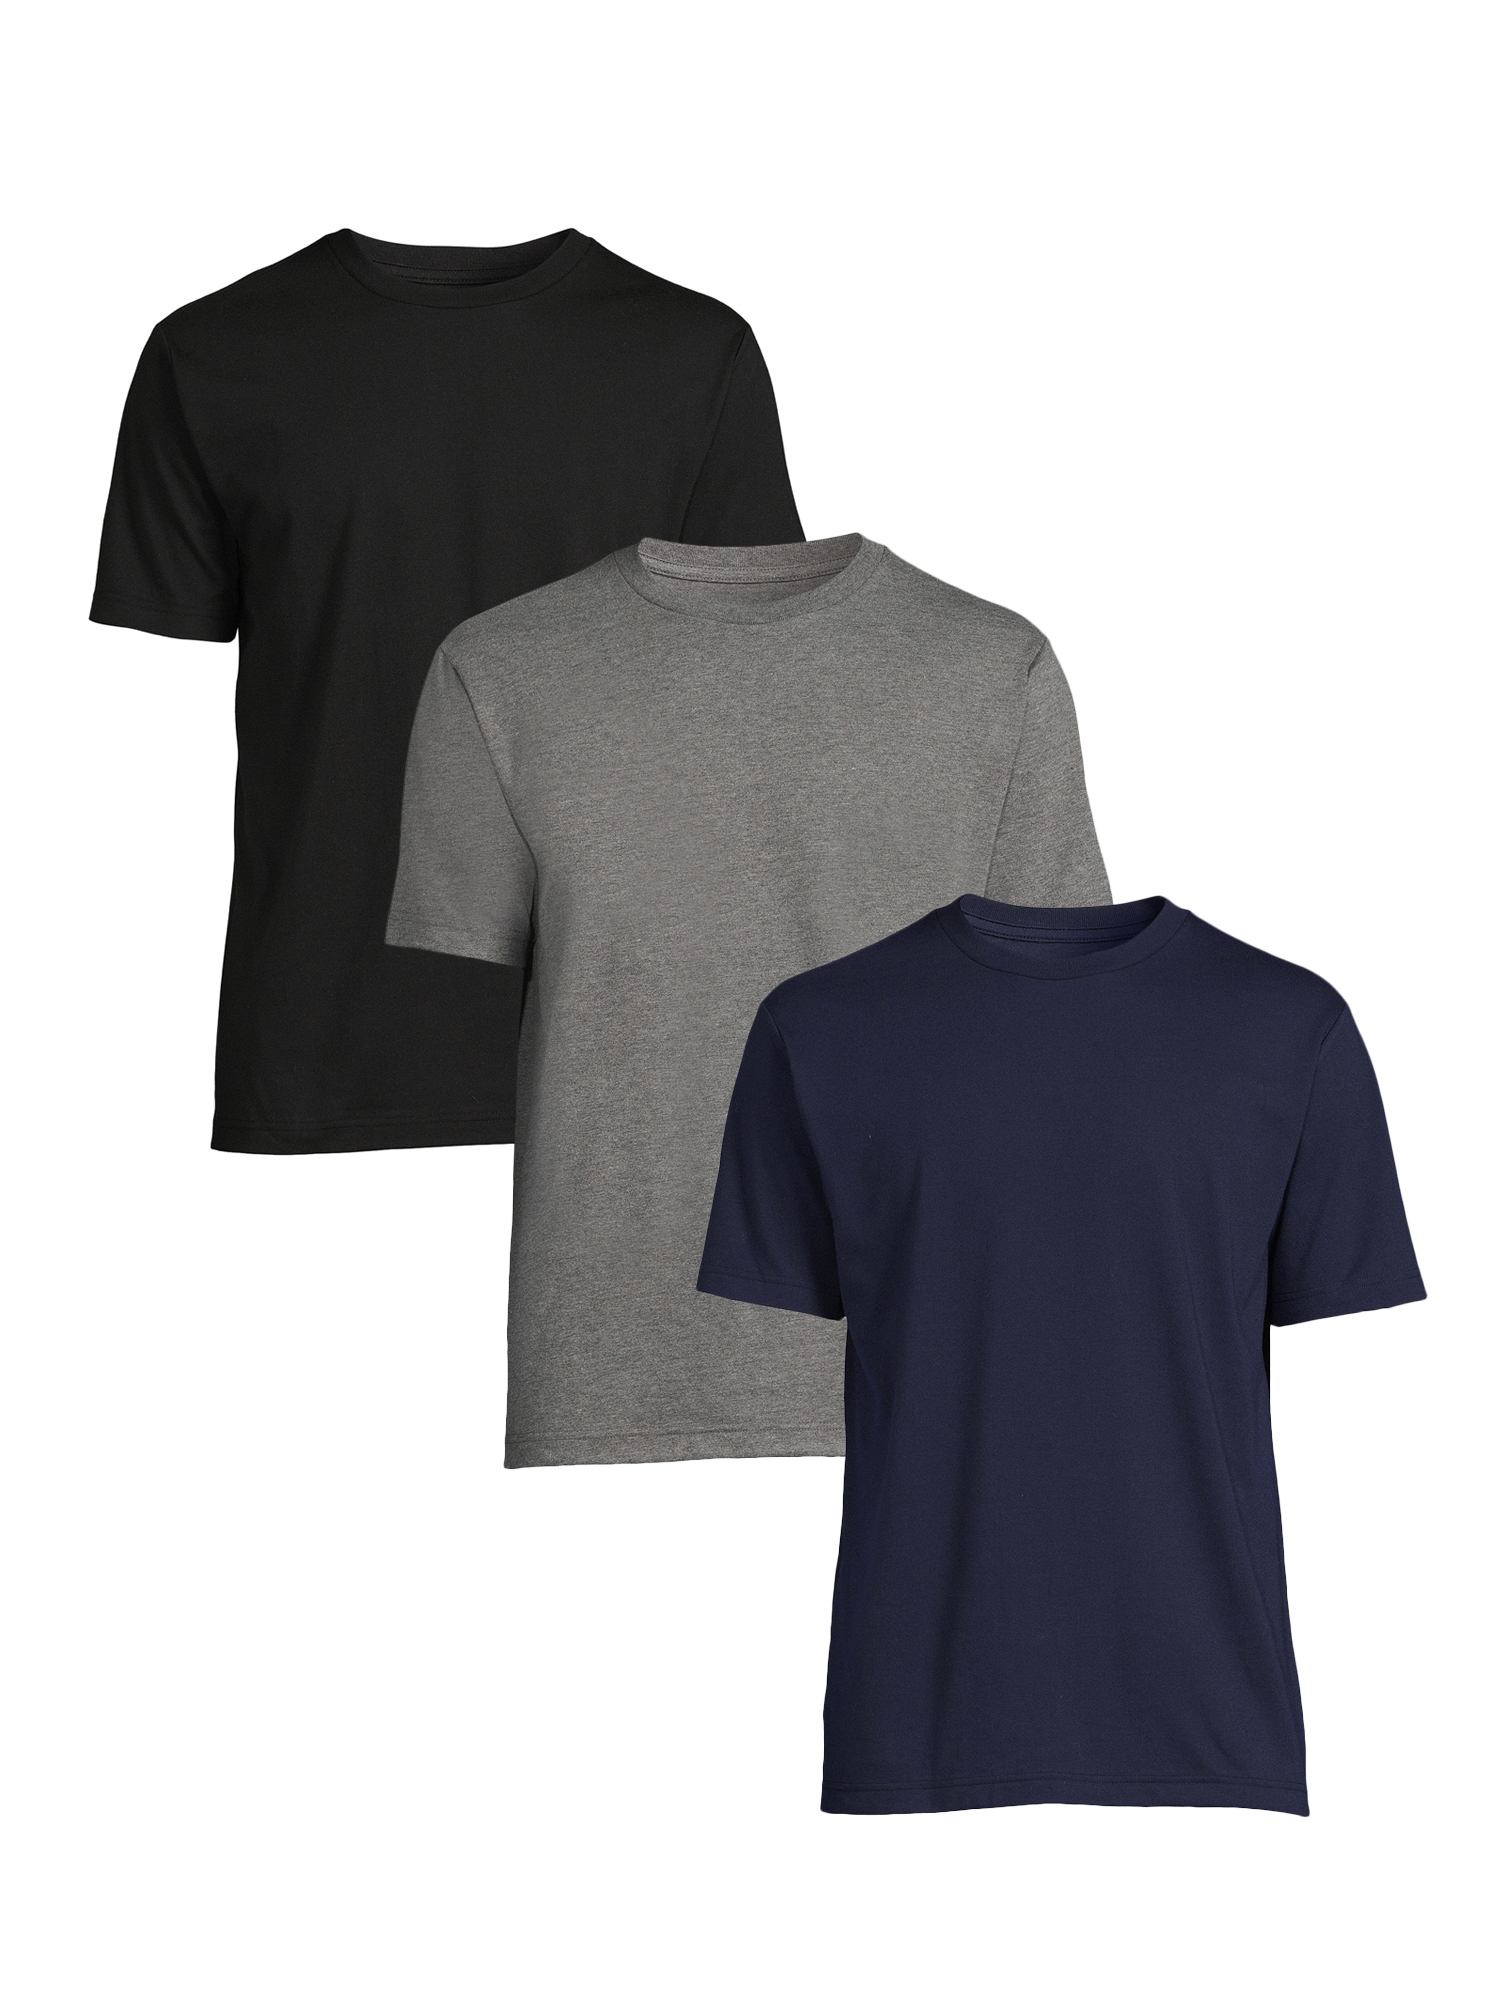 George Men's and Big Men's Crewneck T-Shirt with Short Sleeves, 3-Pack ...